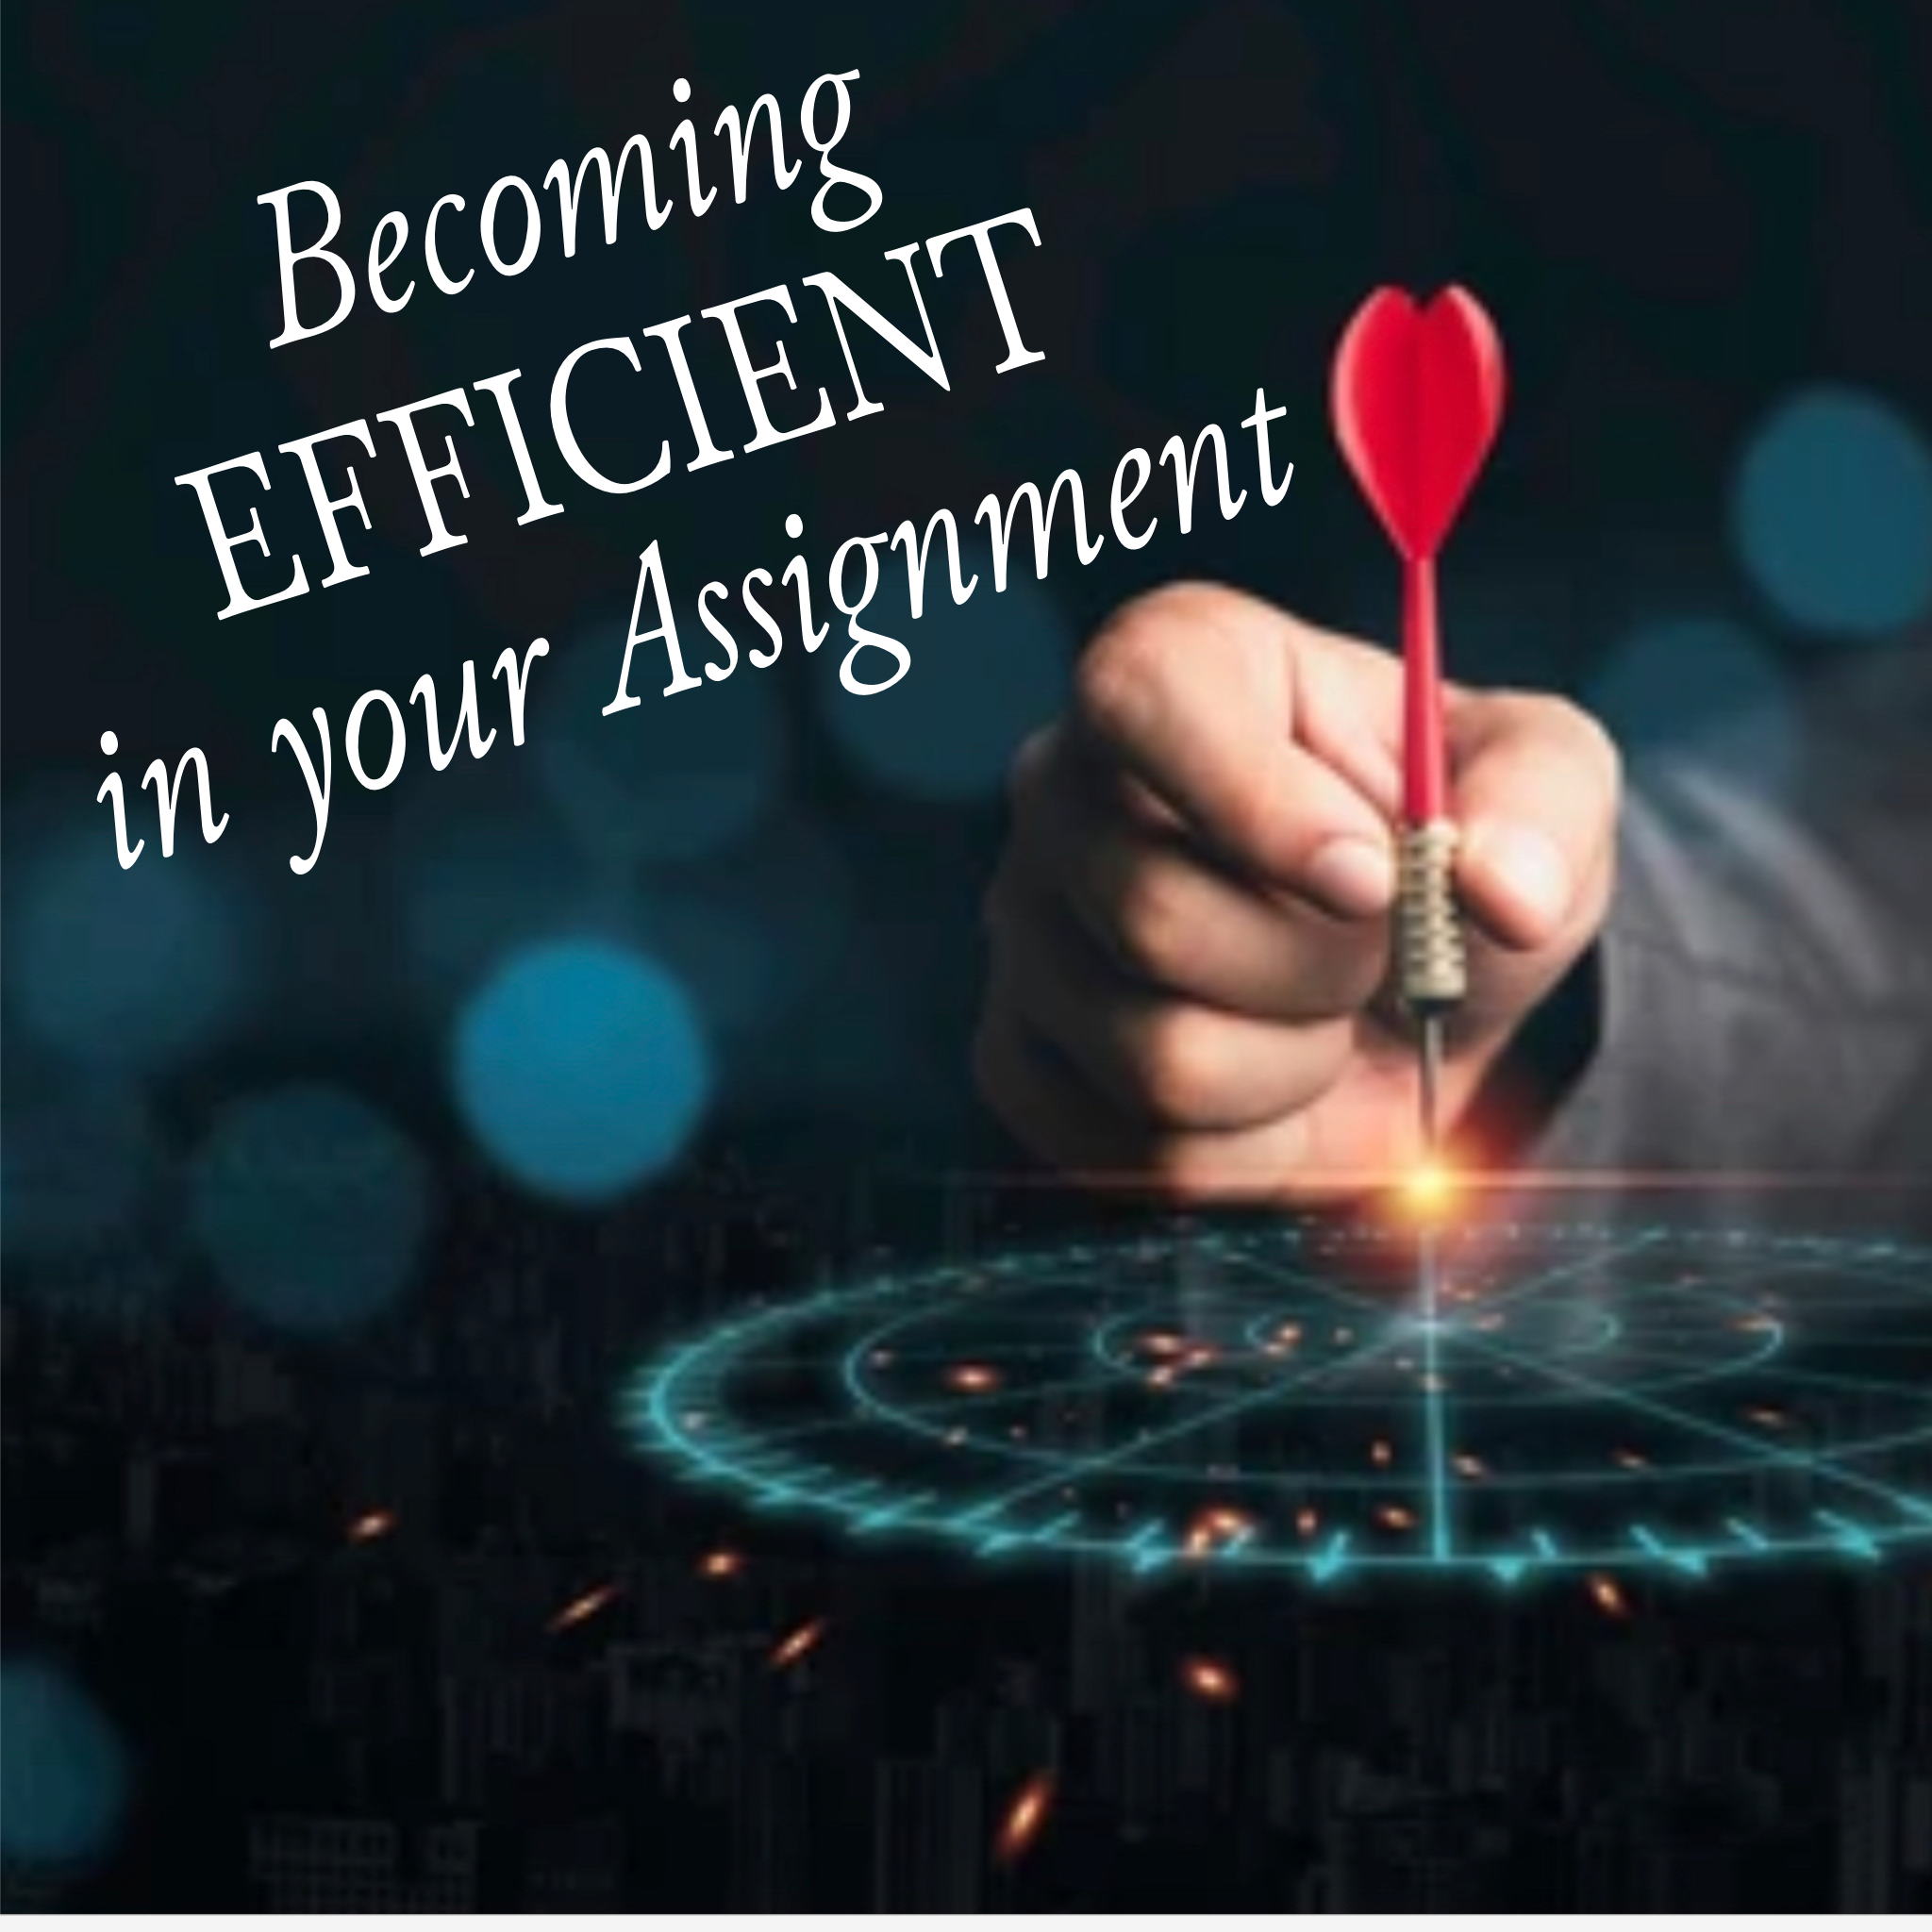 Becoming Efficient in Your Assignment - 4/7/23